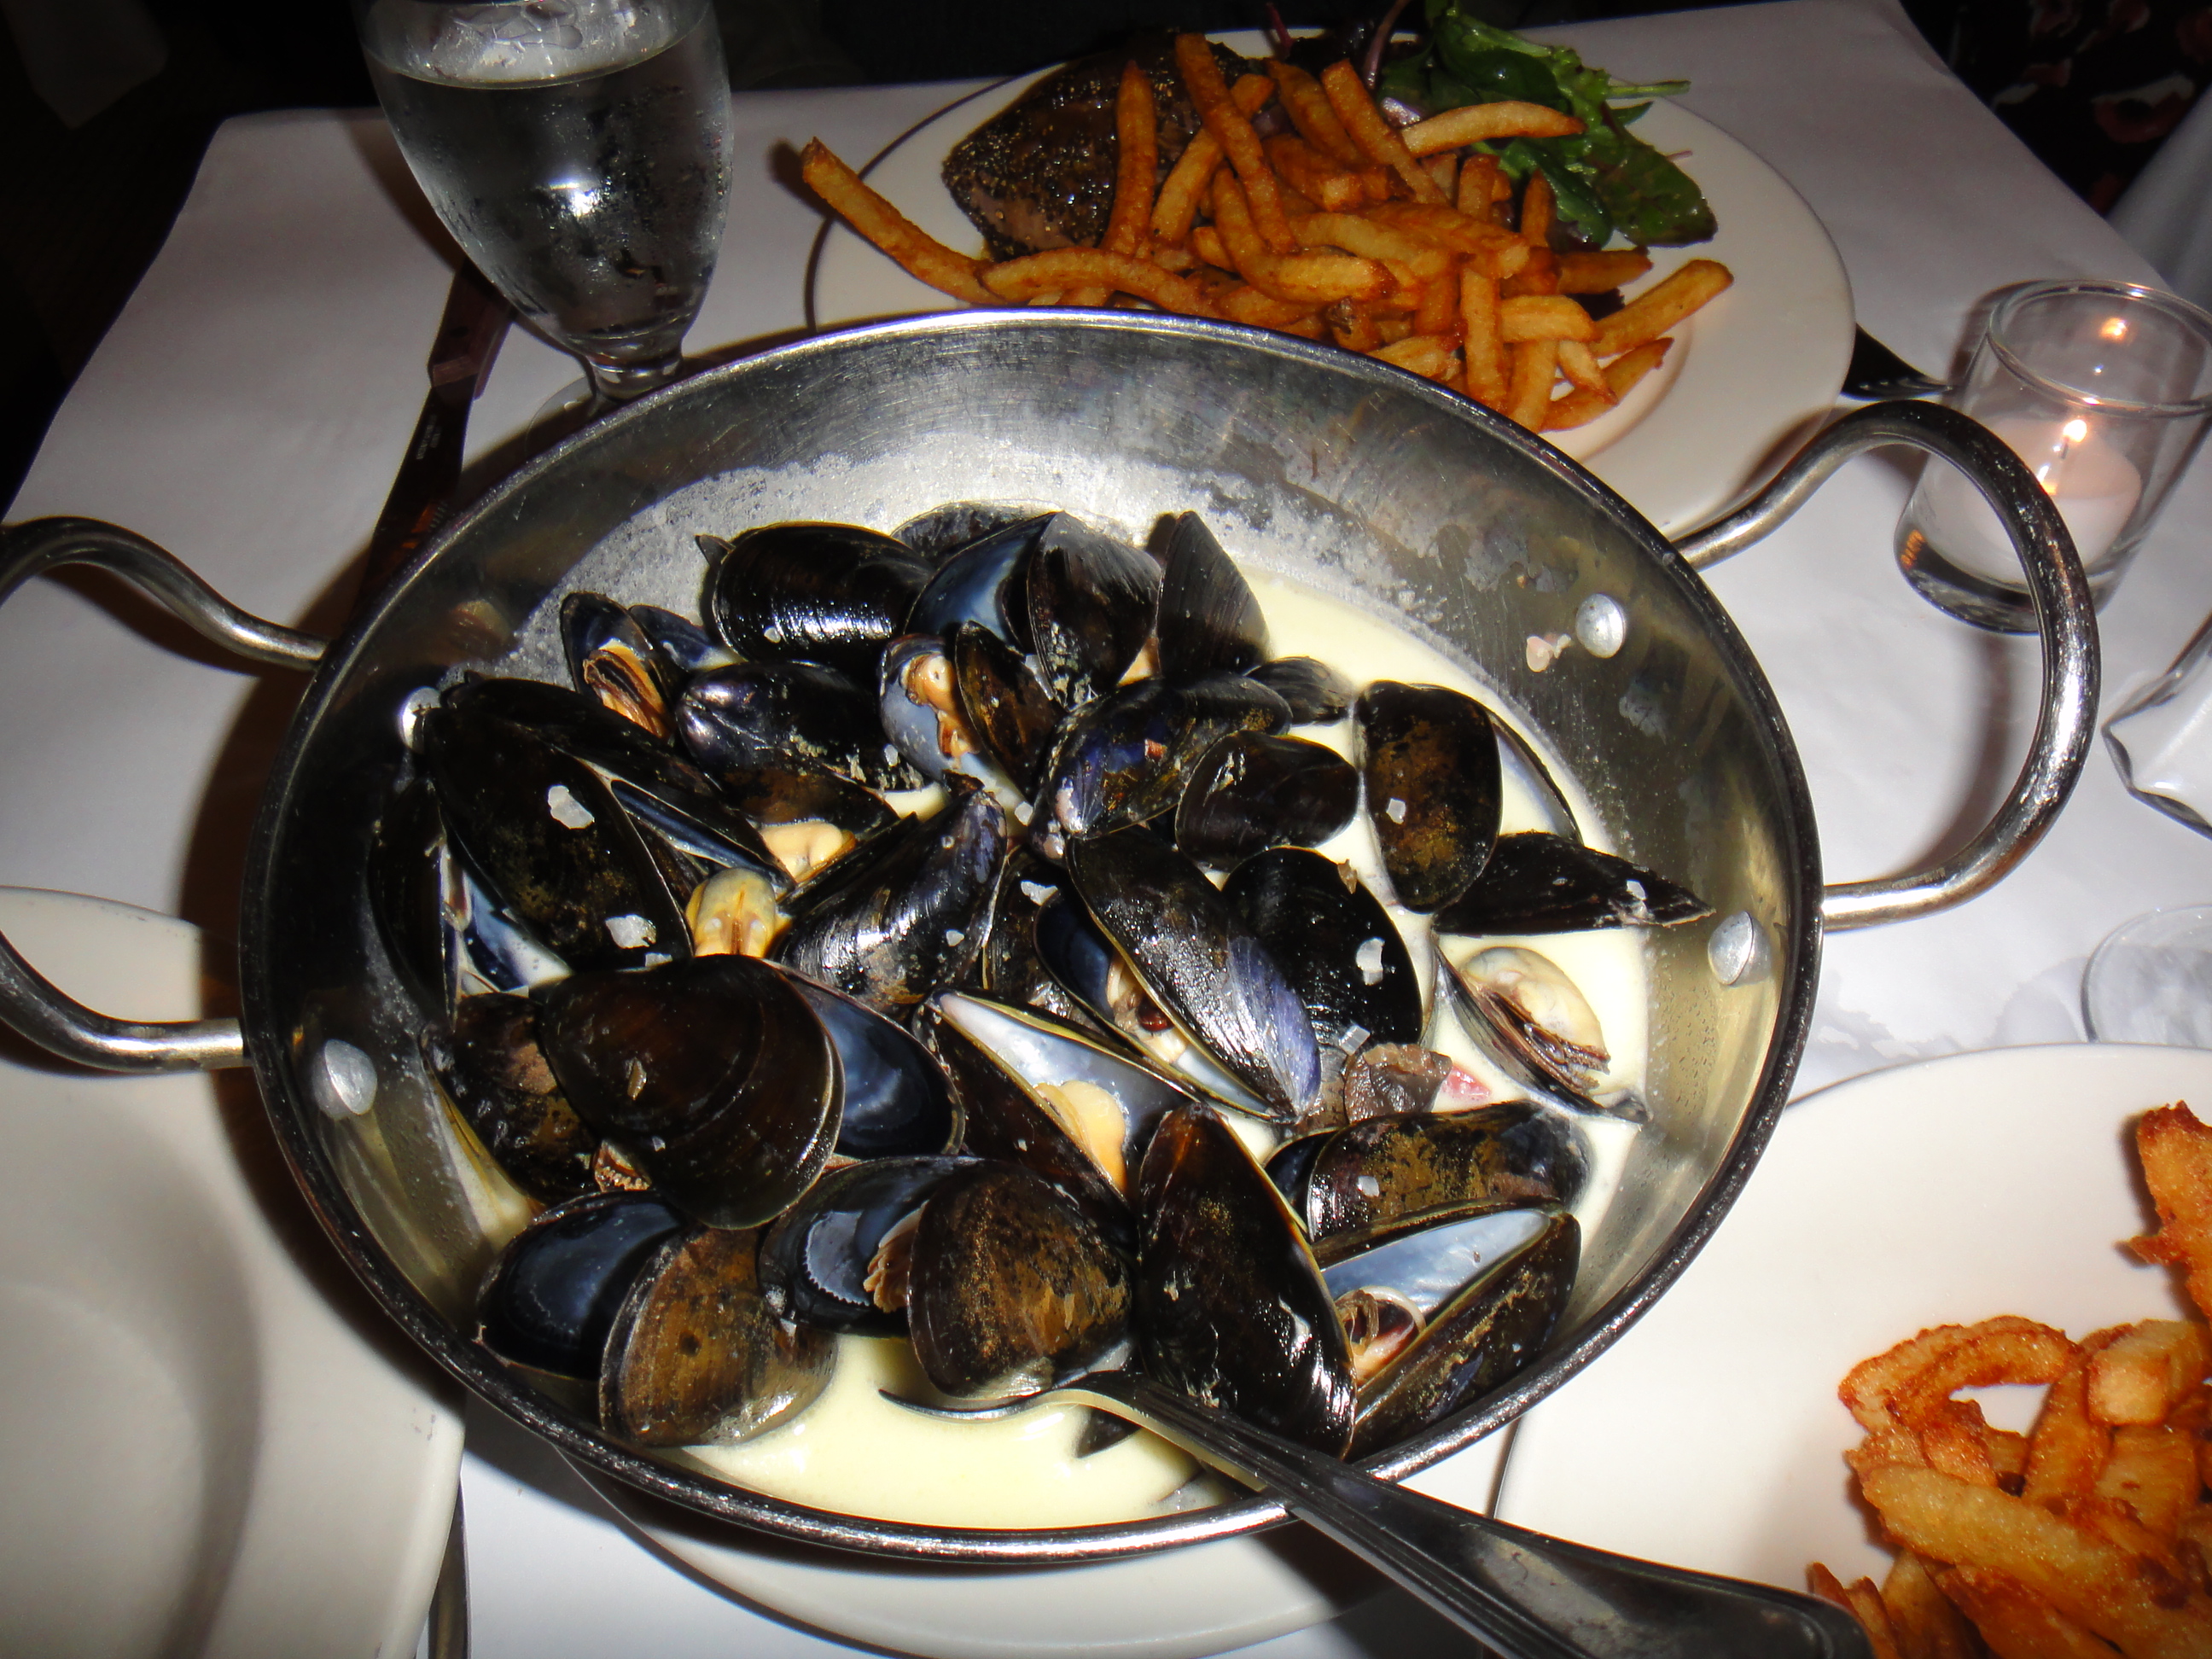 Moules frites from Brasserie Les Halles - a better choice over the Restaurant Week menu